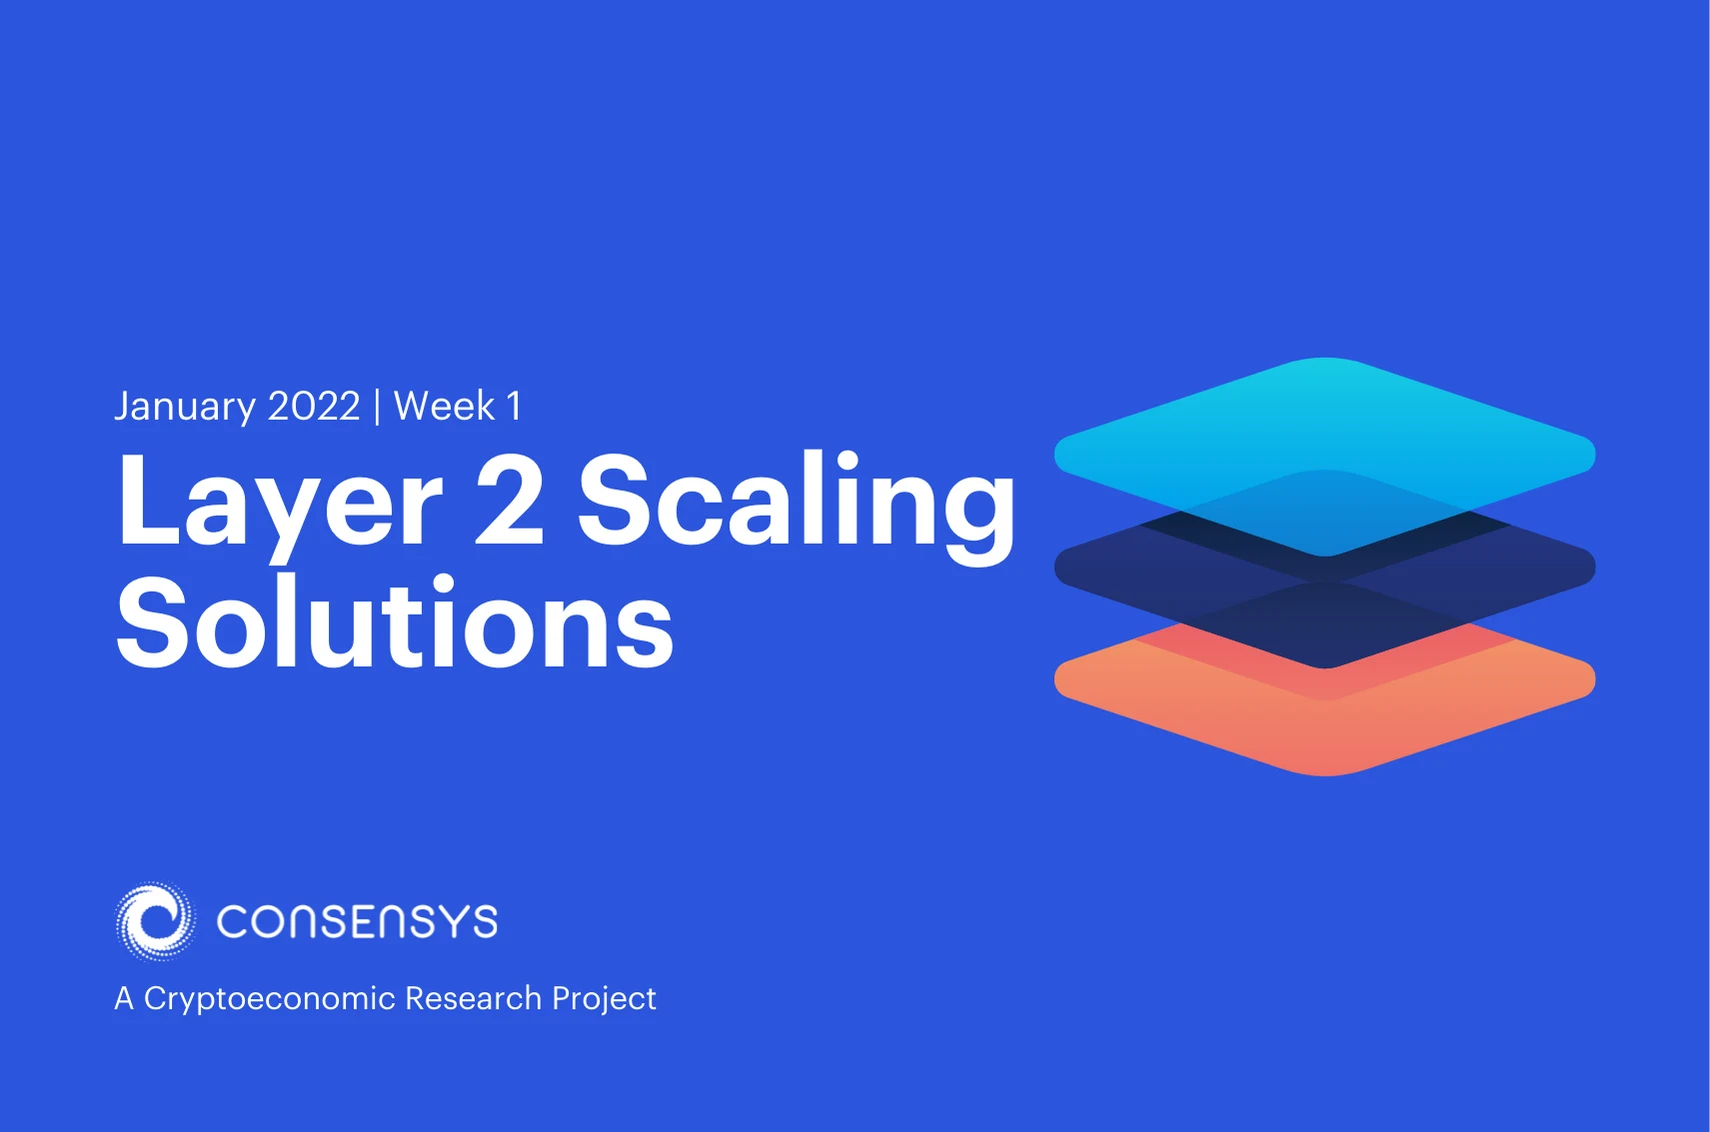 Image: Layer 2 Scaling Solutions | January 2022 | Week 1